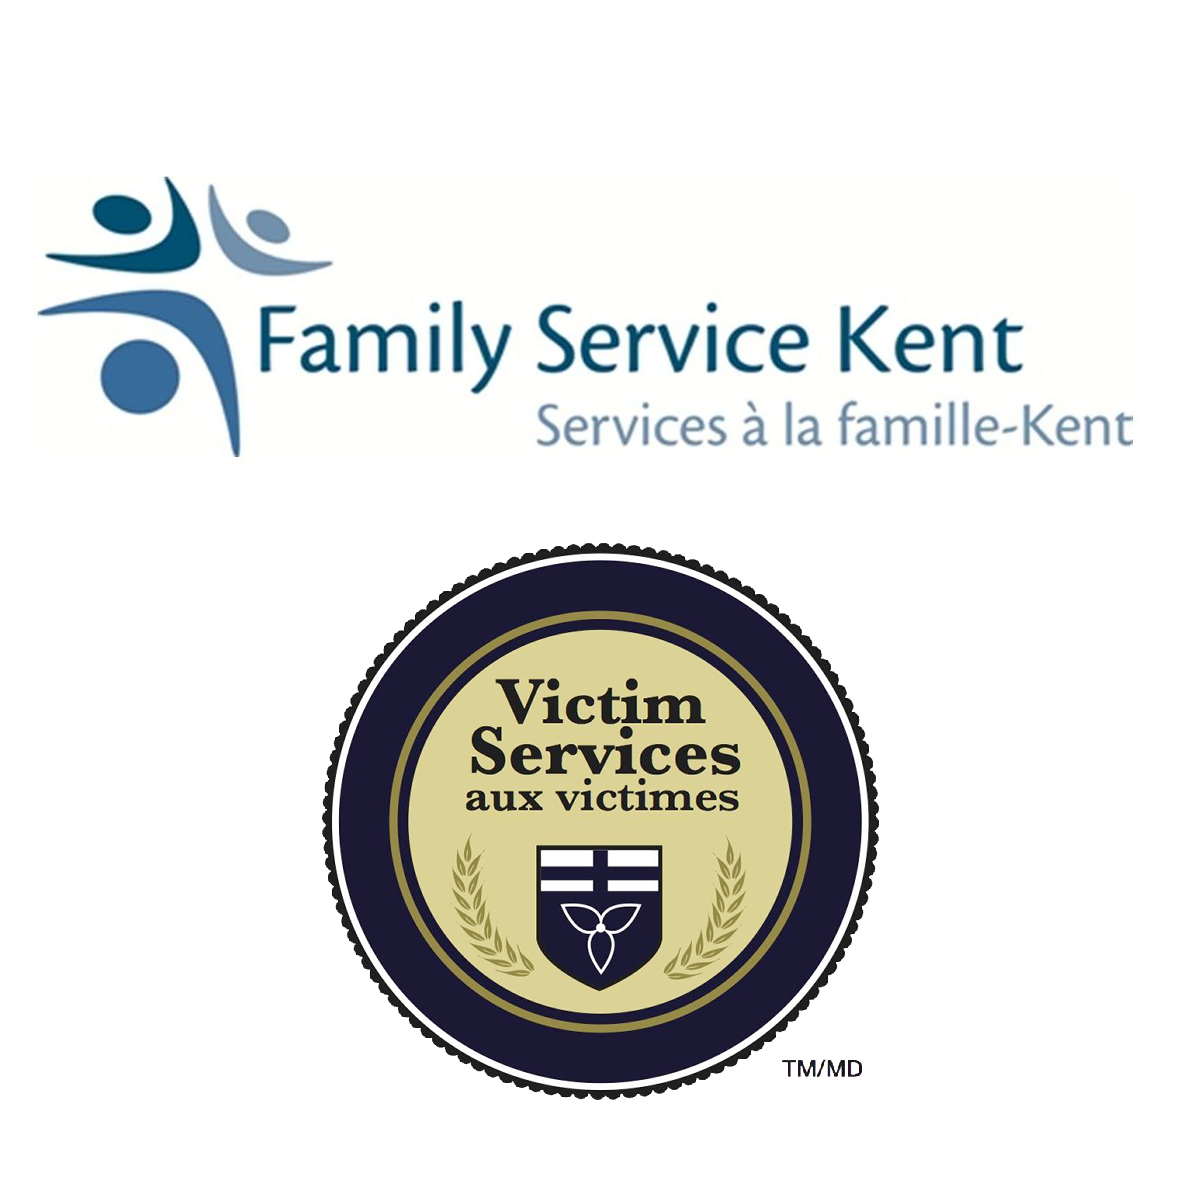 Family Service Kent and CK Victim Services logos